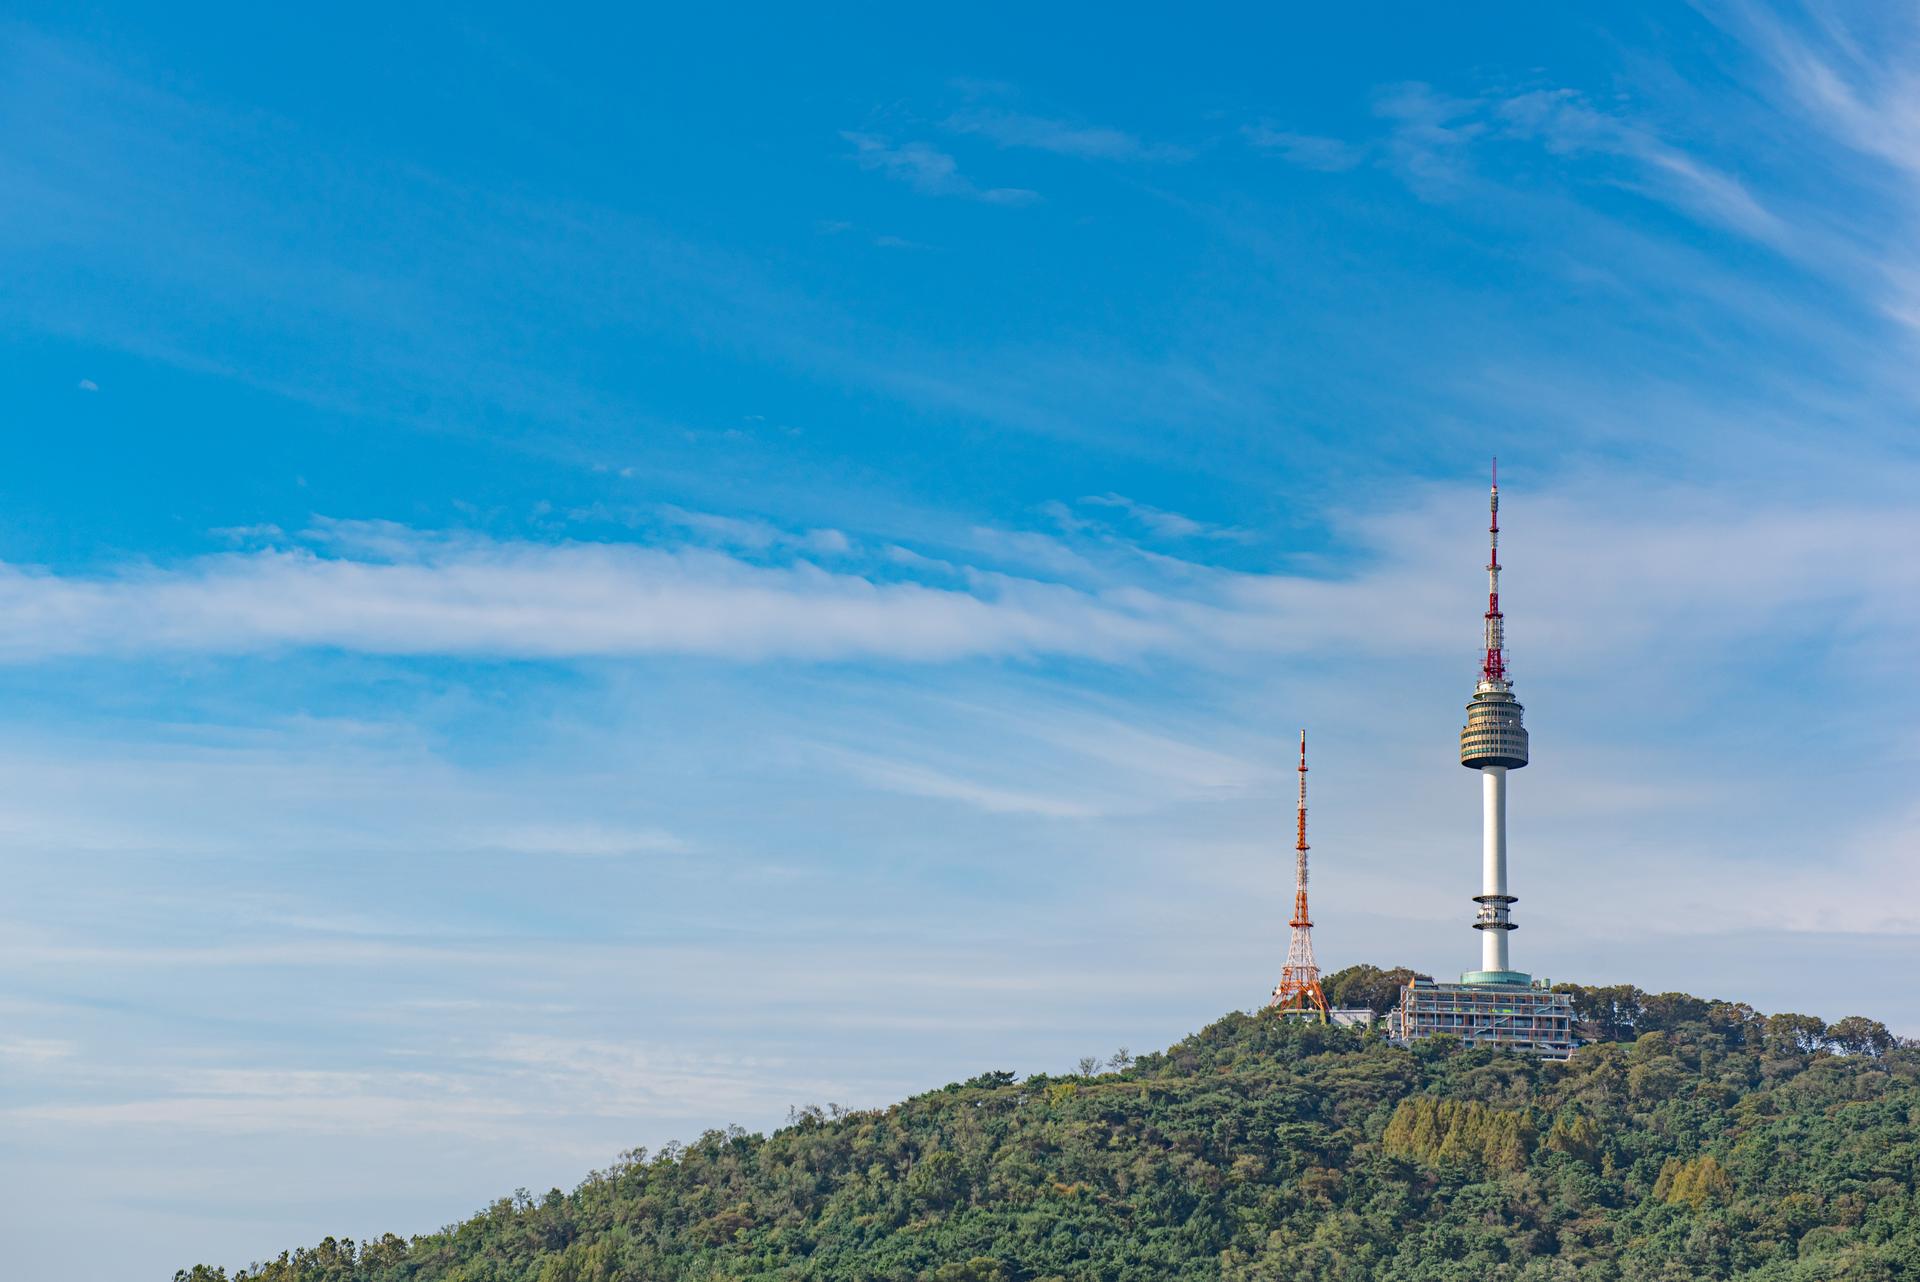 View of N Seoul Tower and its surrounding natural landscape, with clouds and blue sky.